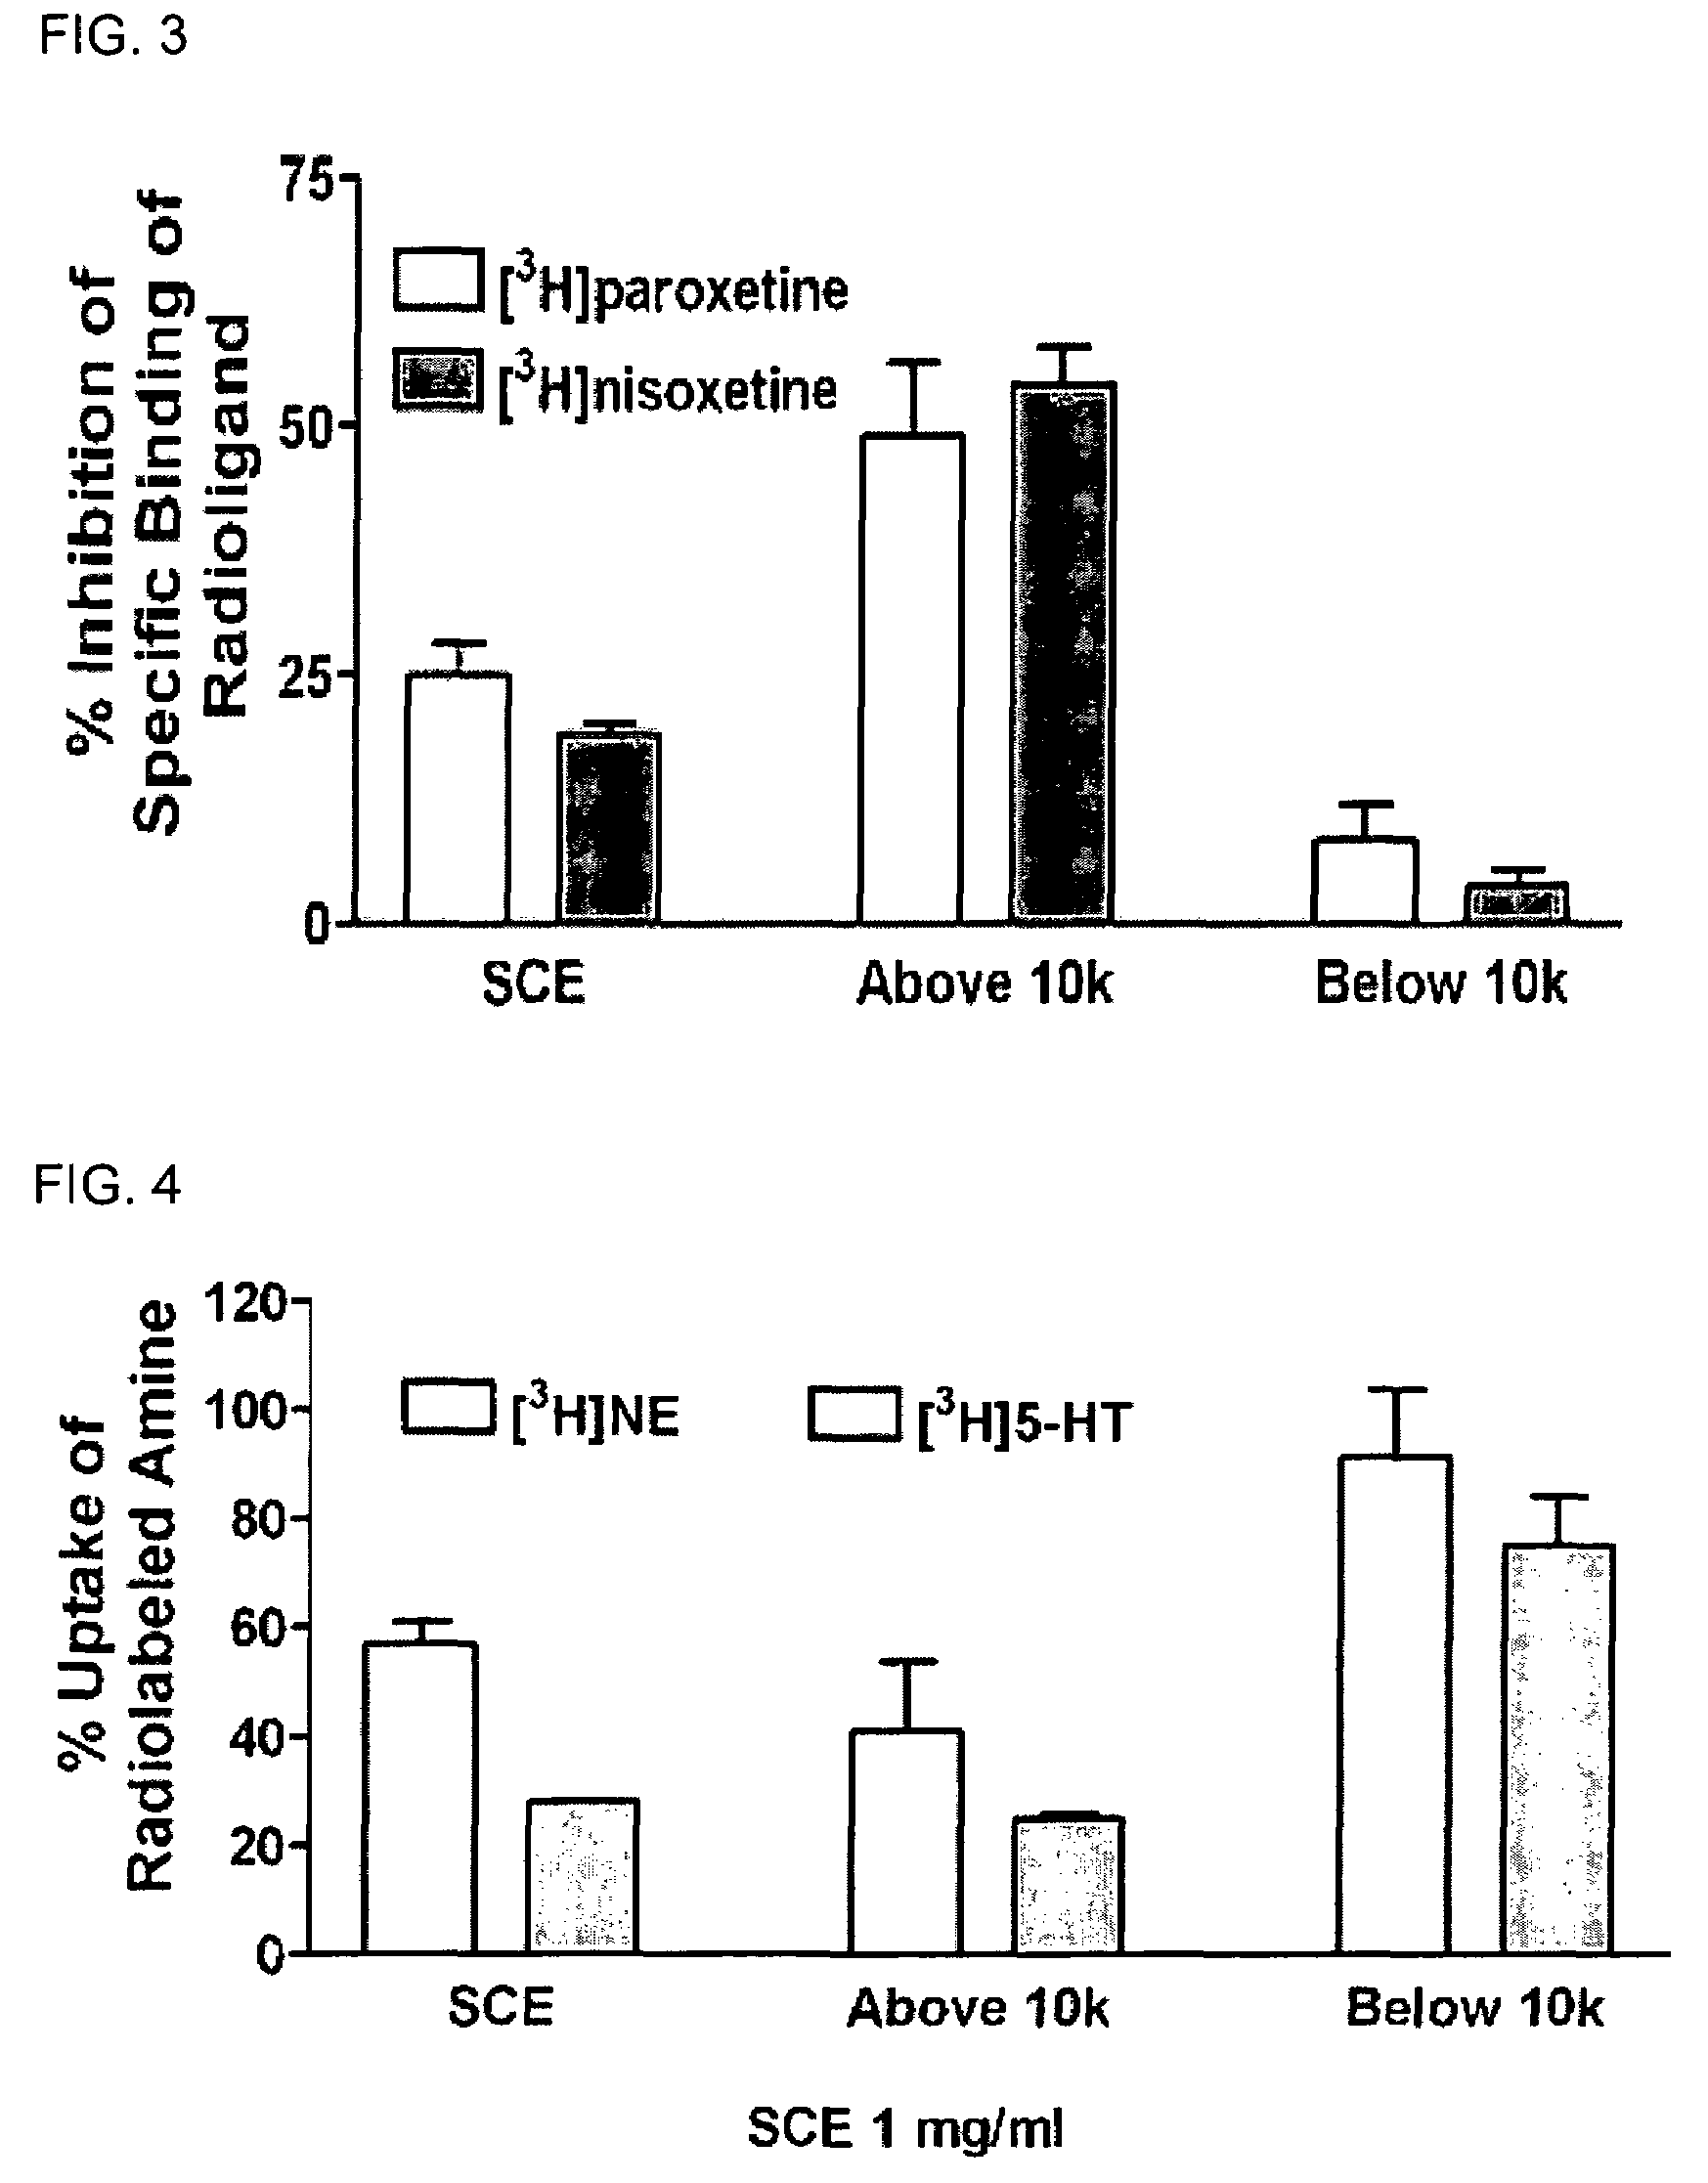 Method for selectively inhibiting reuptake of serotonin and norepinephrine using yeast extract